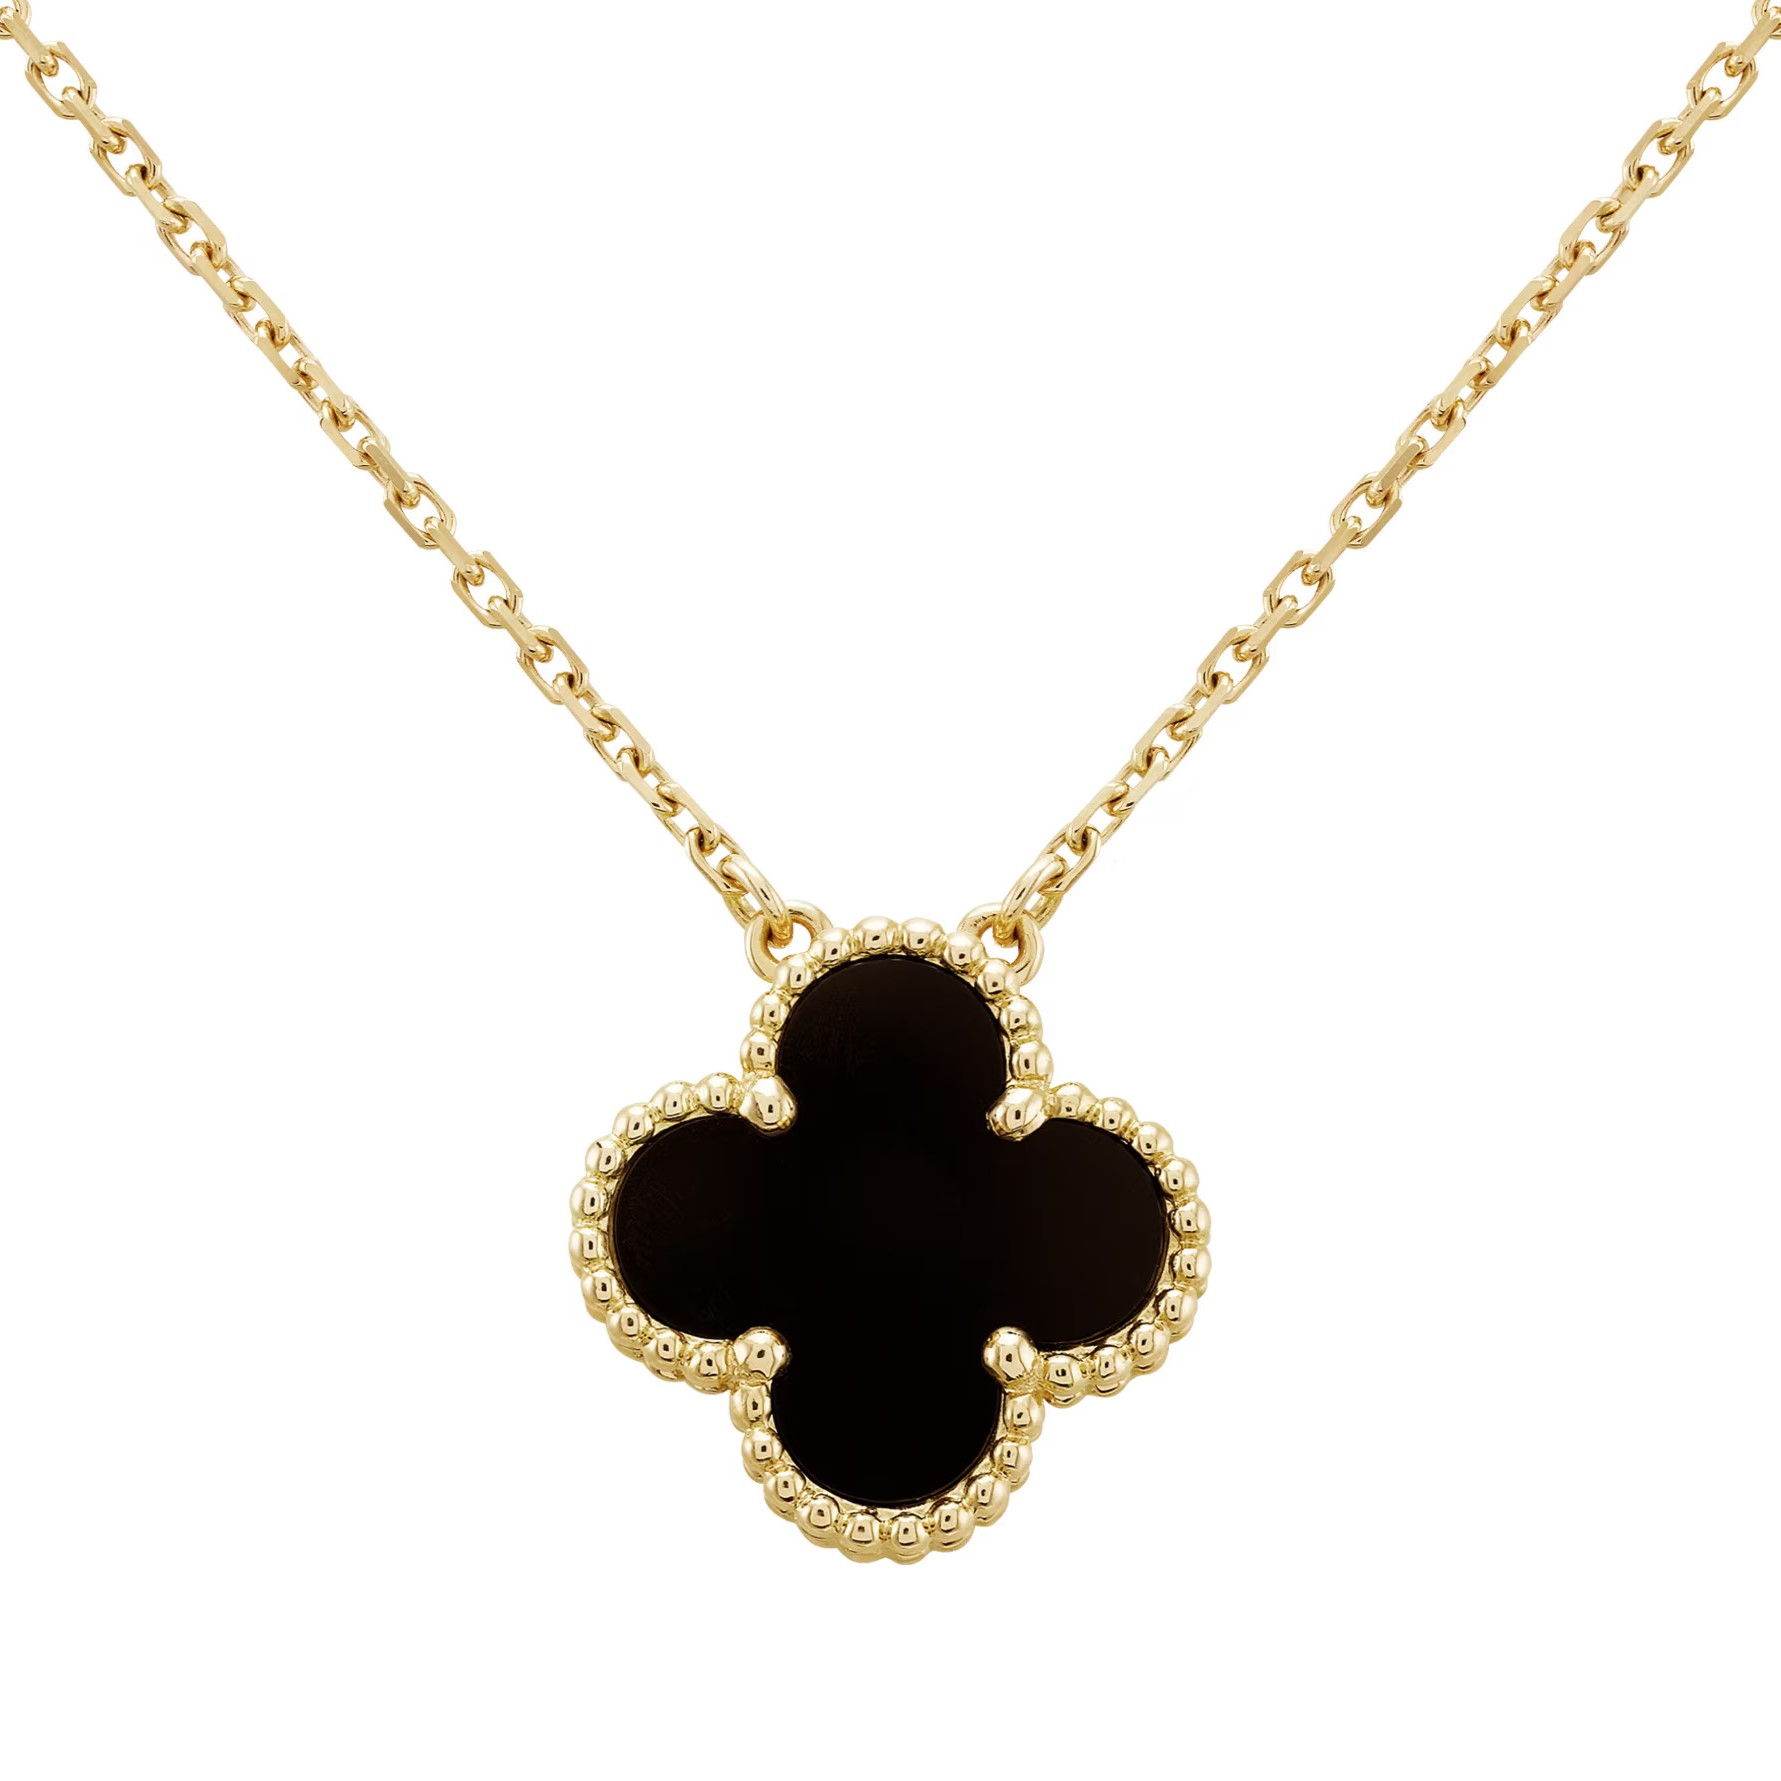 DÂY CHUYỀN VAN CLEEF & ARPELS VINTAGE ALHAMBRA NECKLACE PENDANT IN GOLD VCARA45800 3